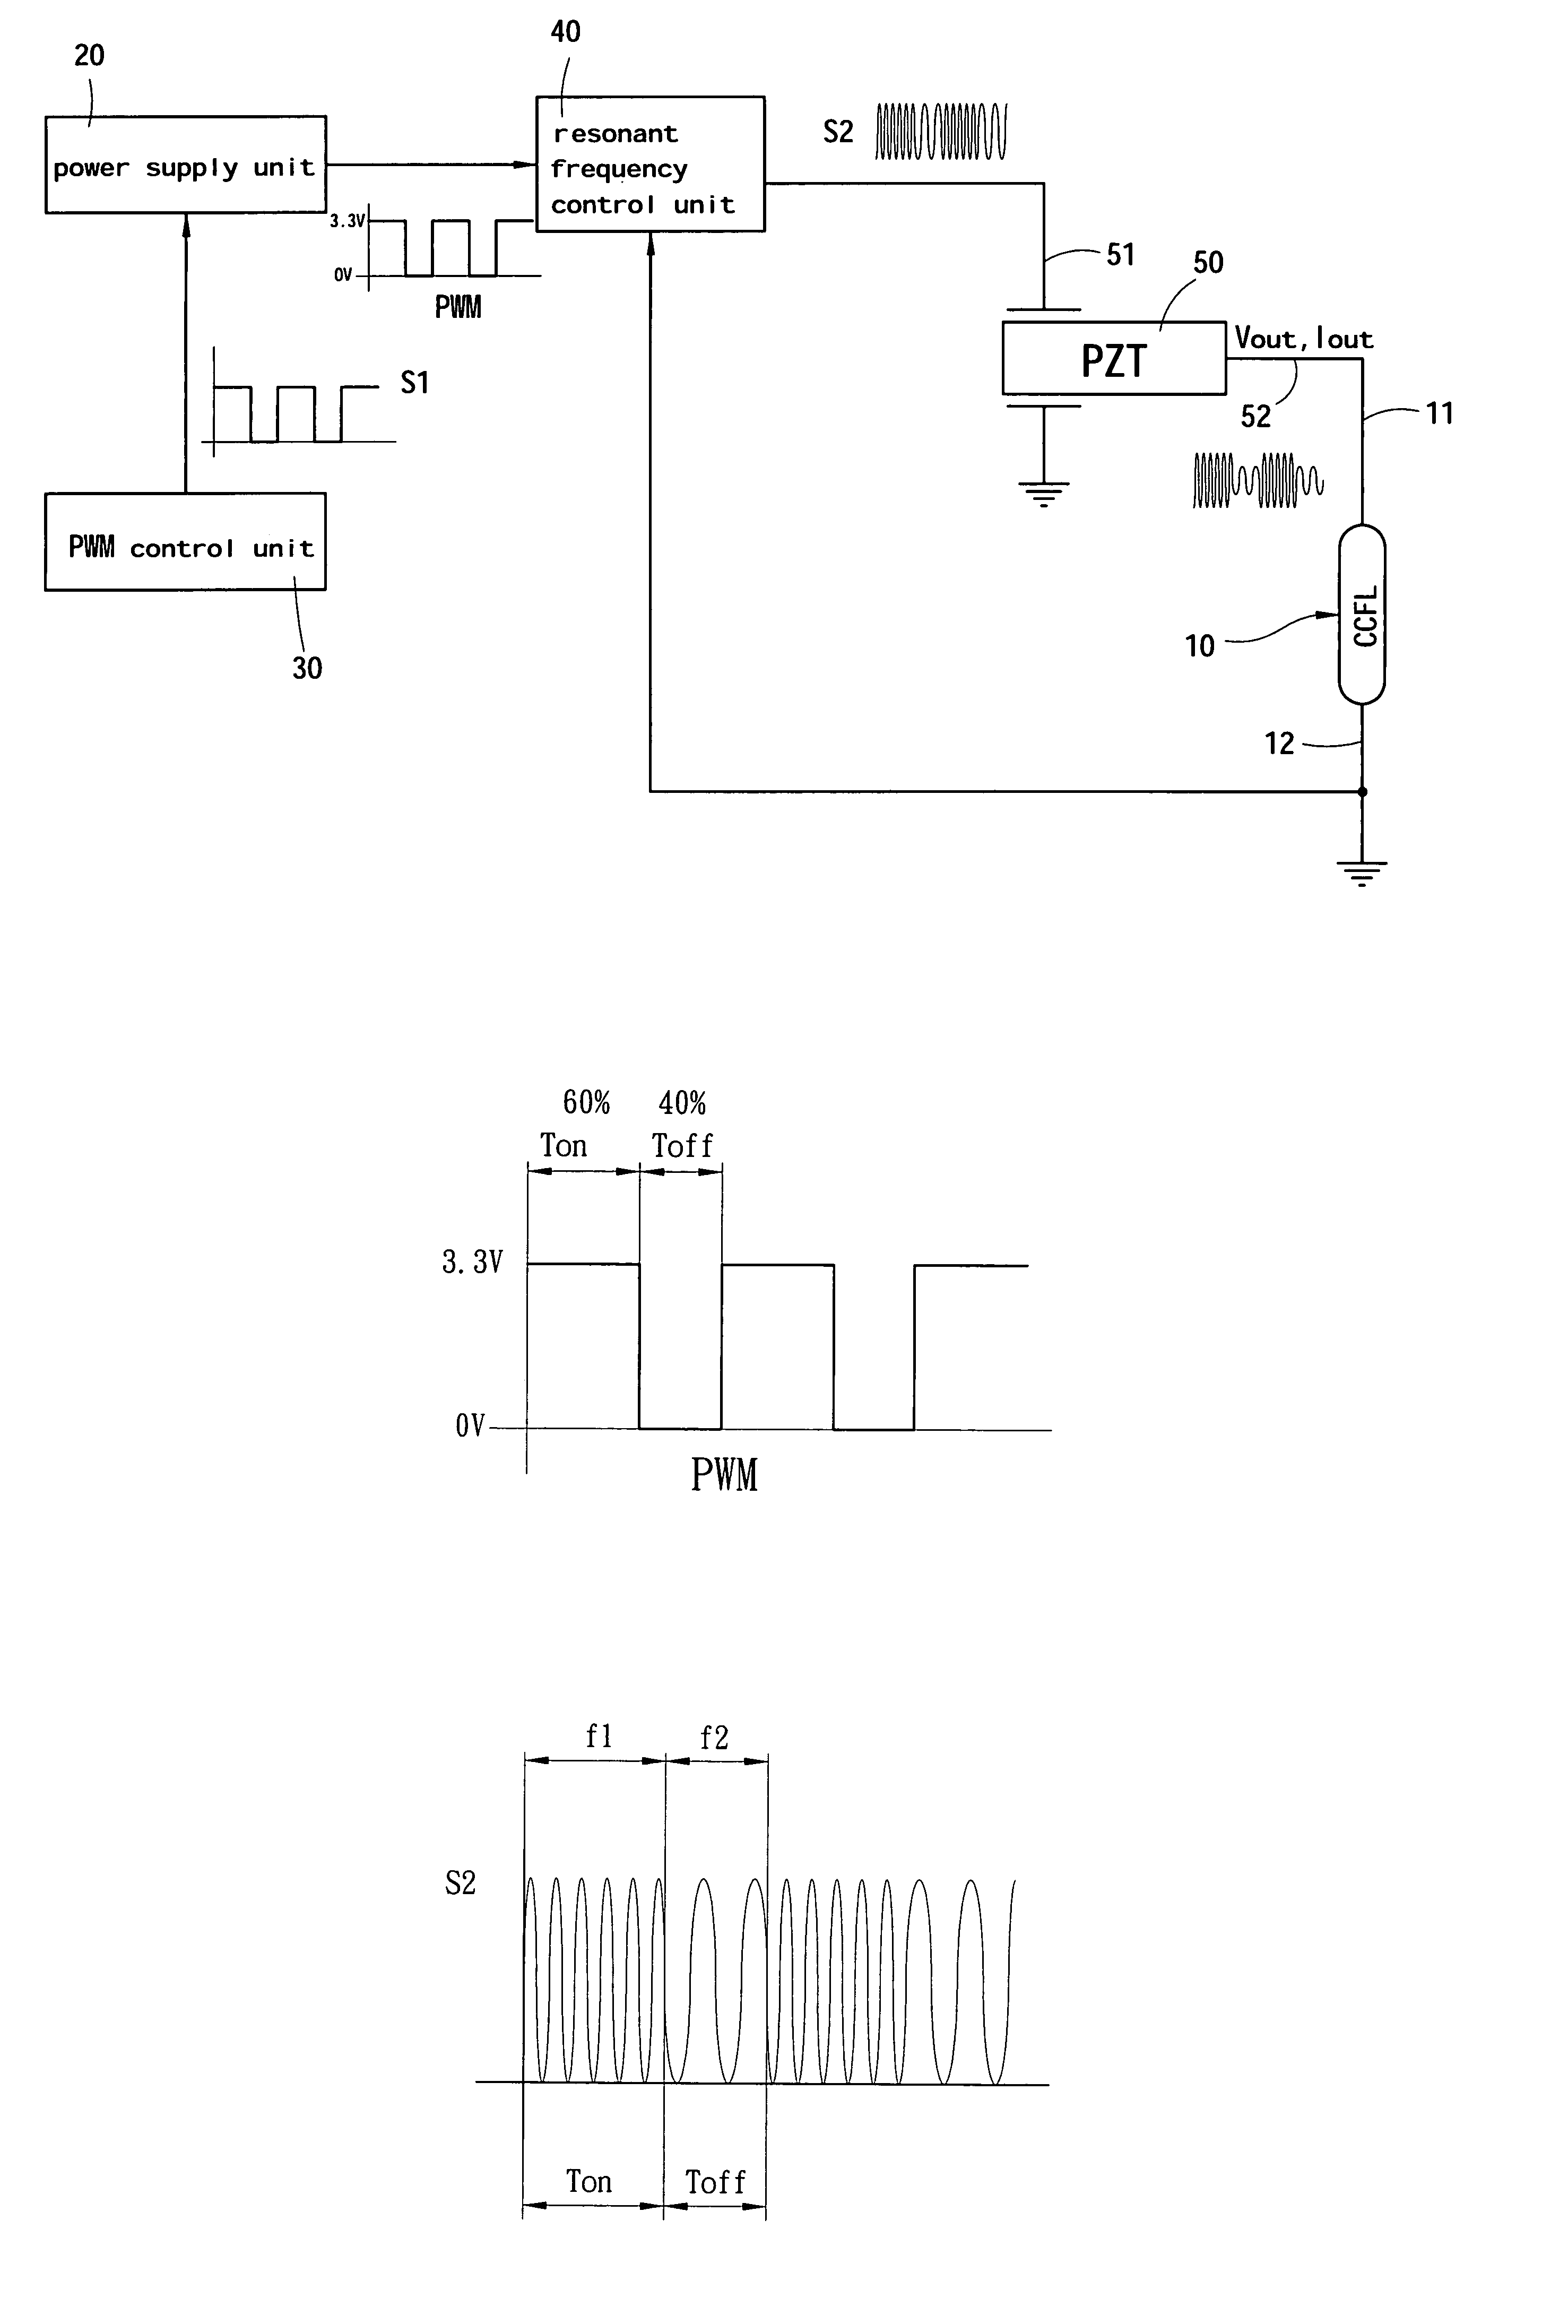 Light modulation method and apparatus for cold cathode fluorescent lamps